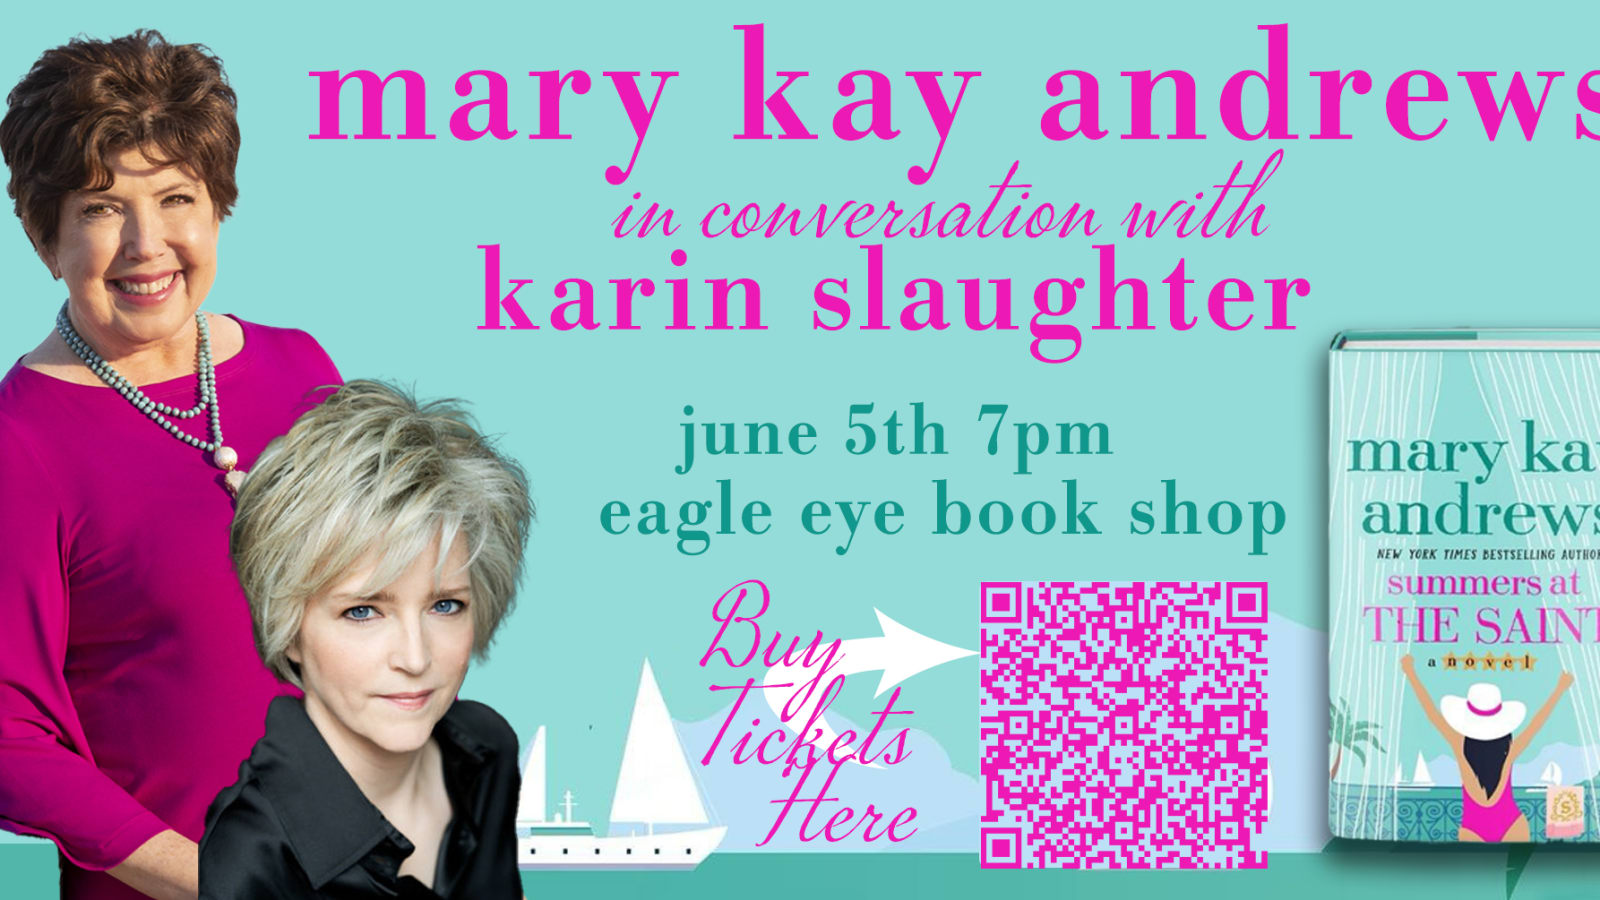 Mary Kay Andrews with Karin Slaughter